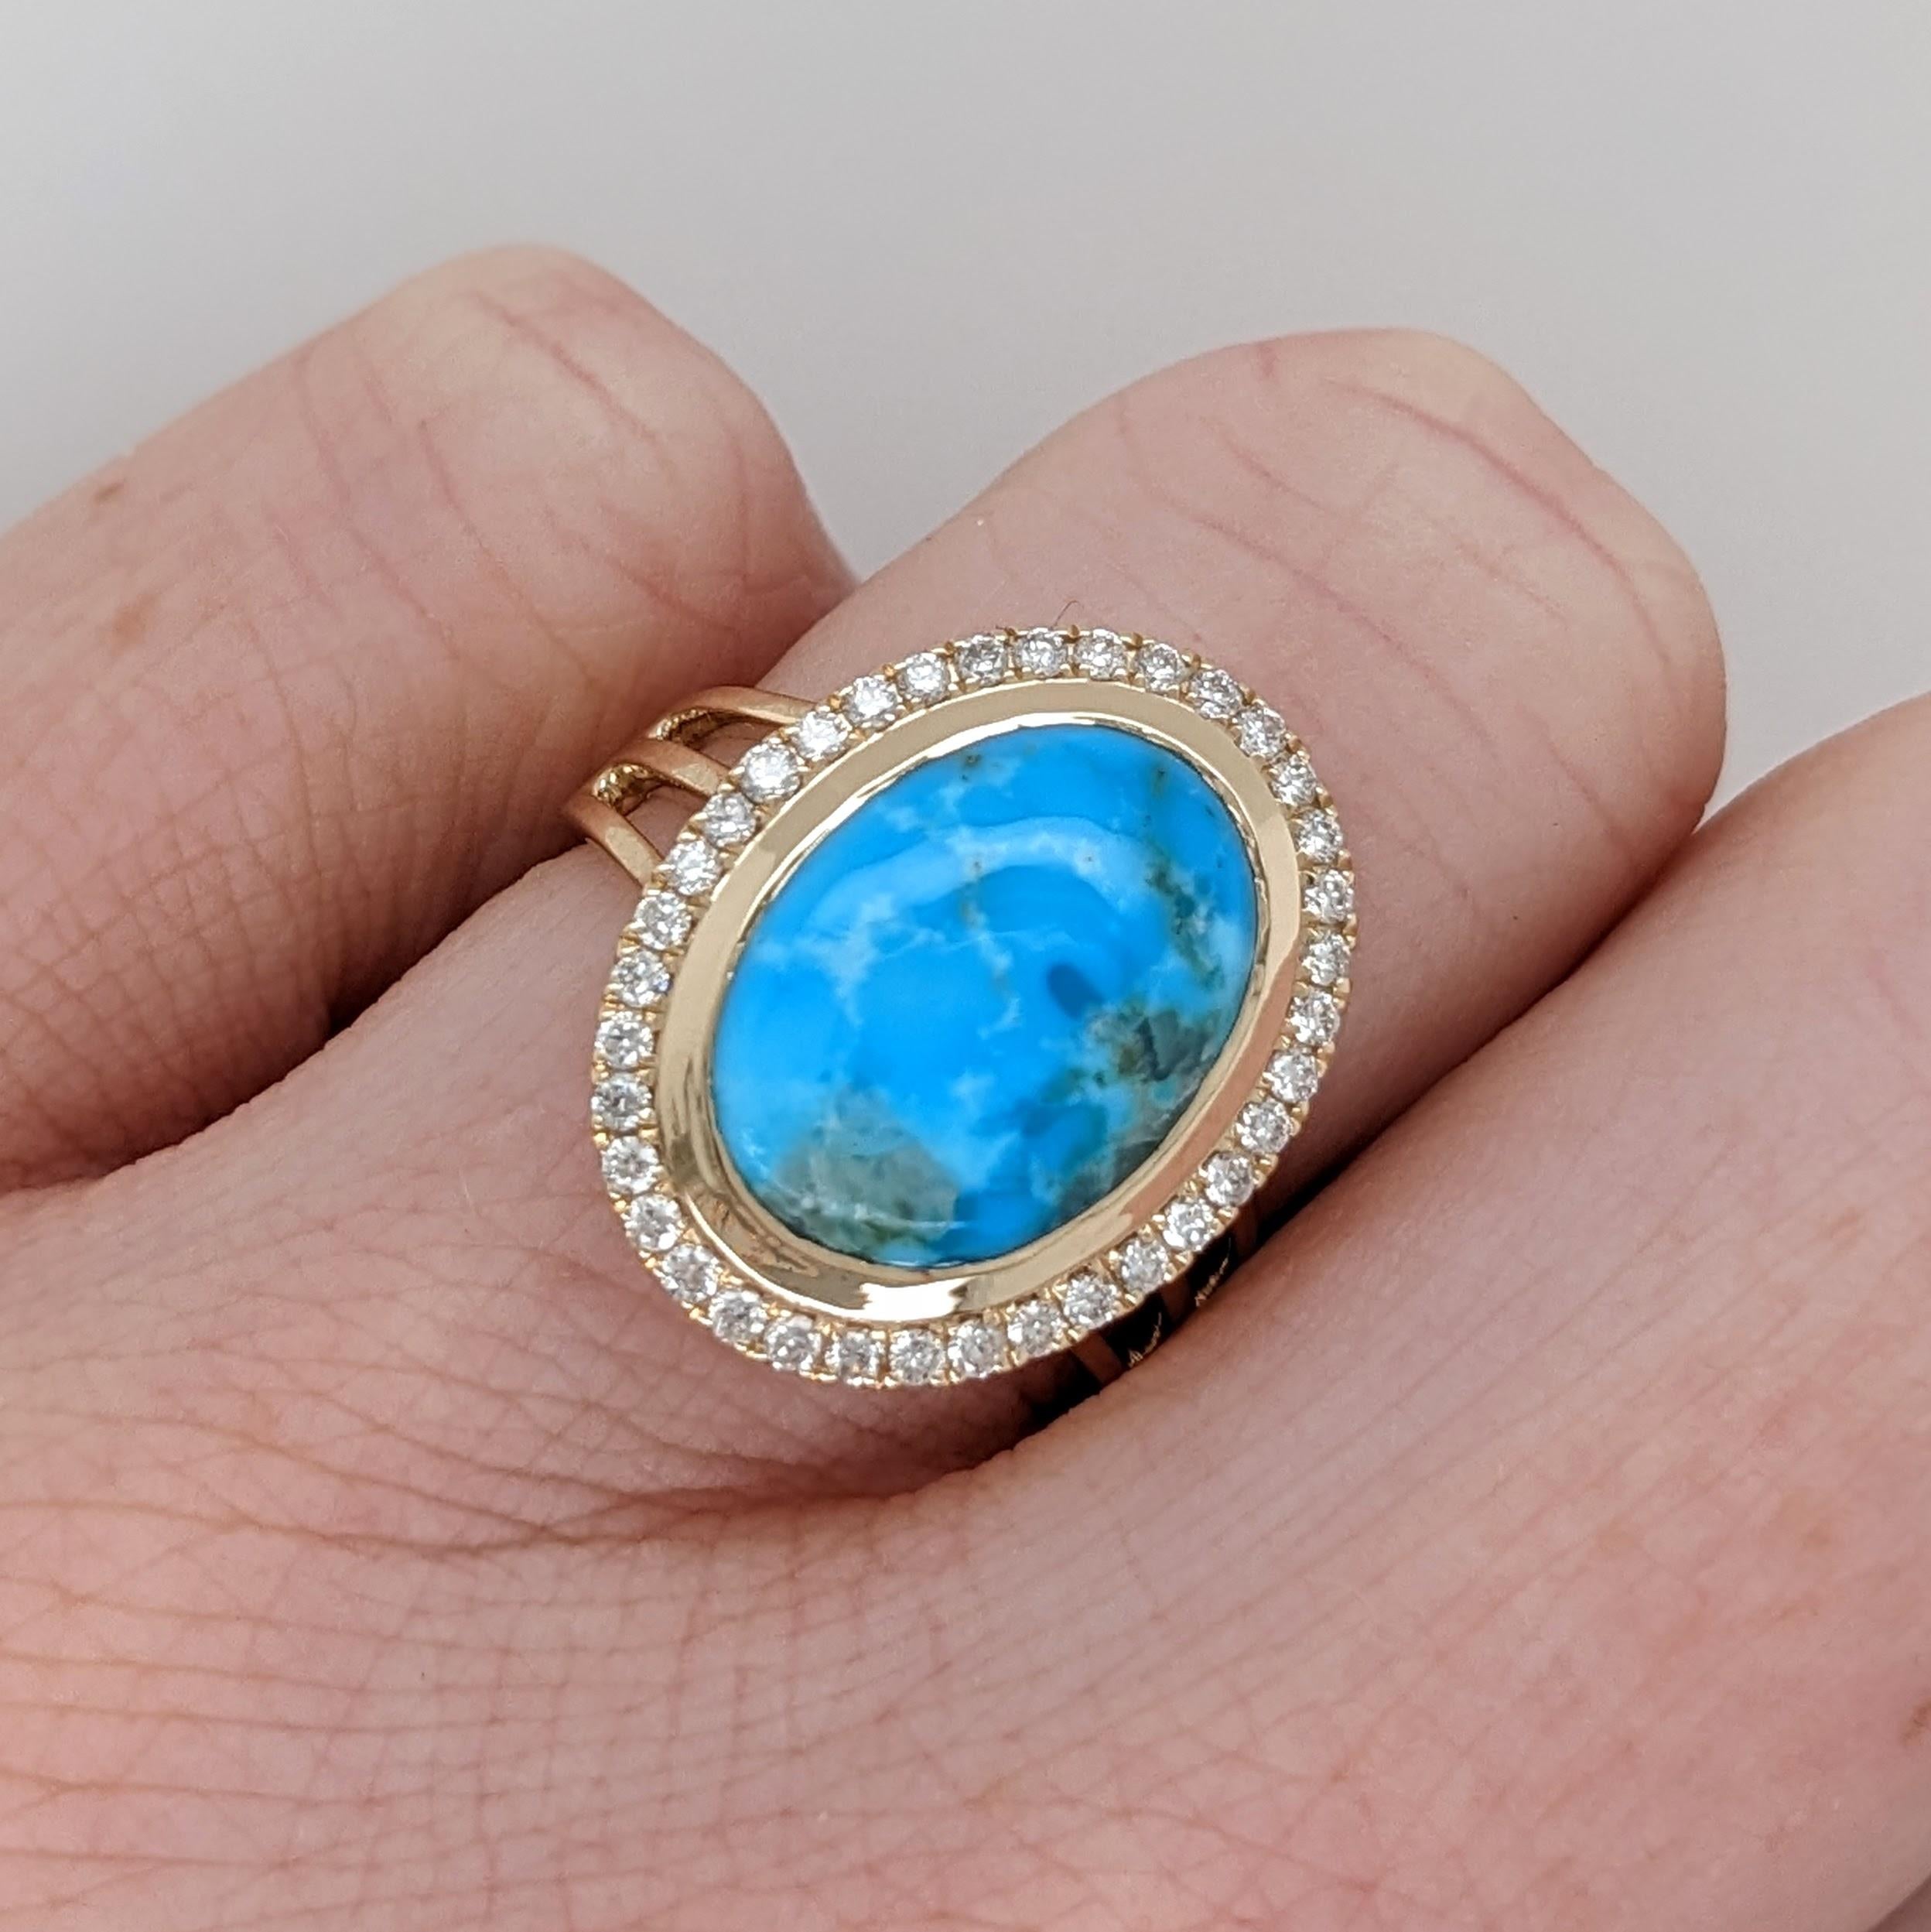 Women's 4.68ct Sonoran Turquoise Ring w Diamond Halo in 14k Solid Yellow Gold Oval 14x10